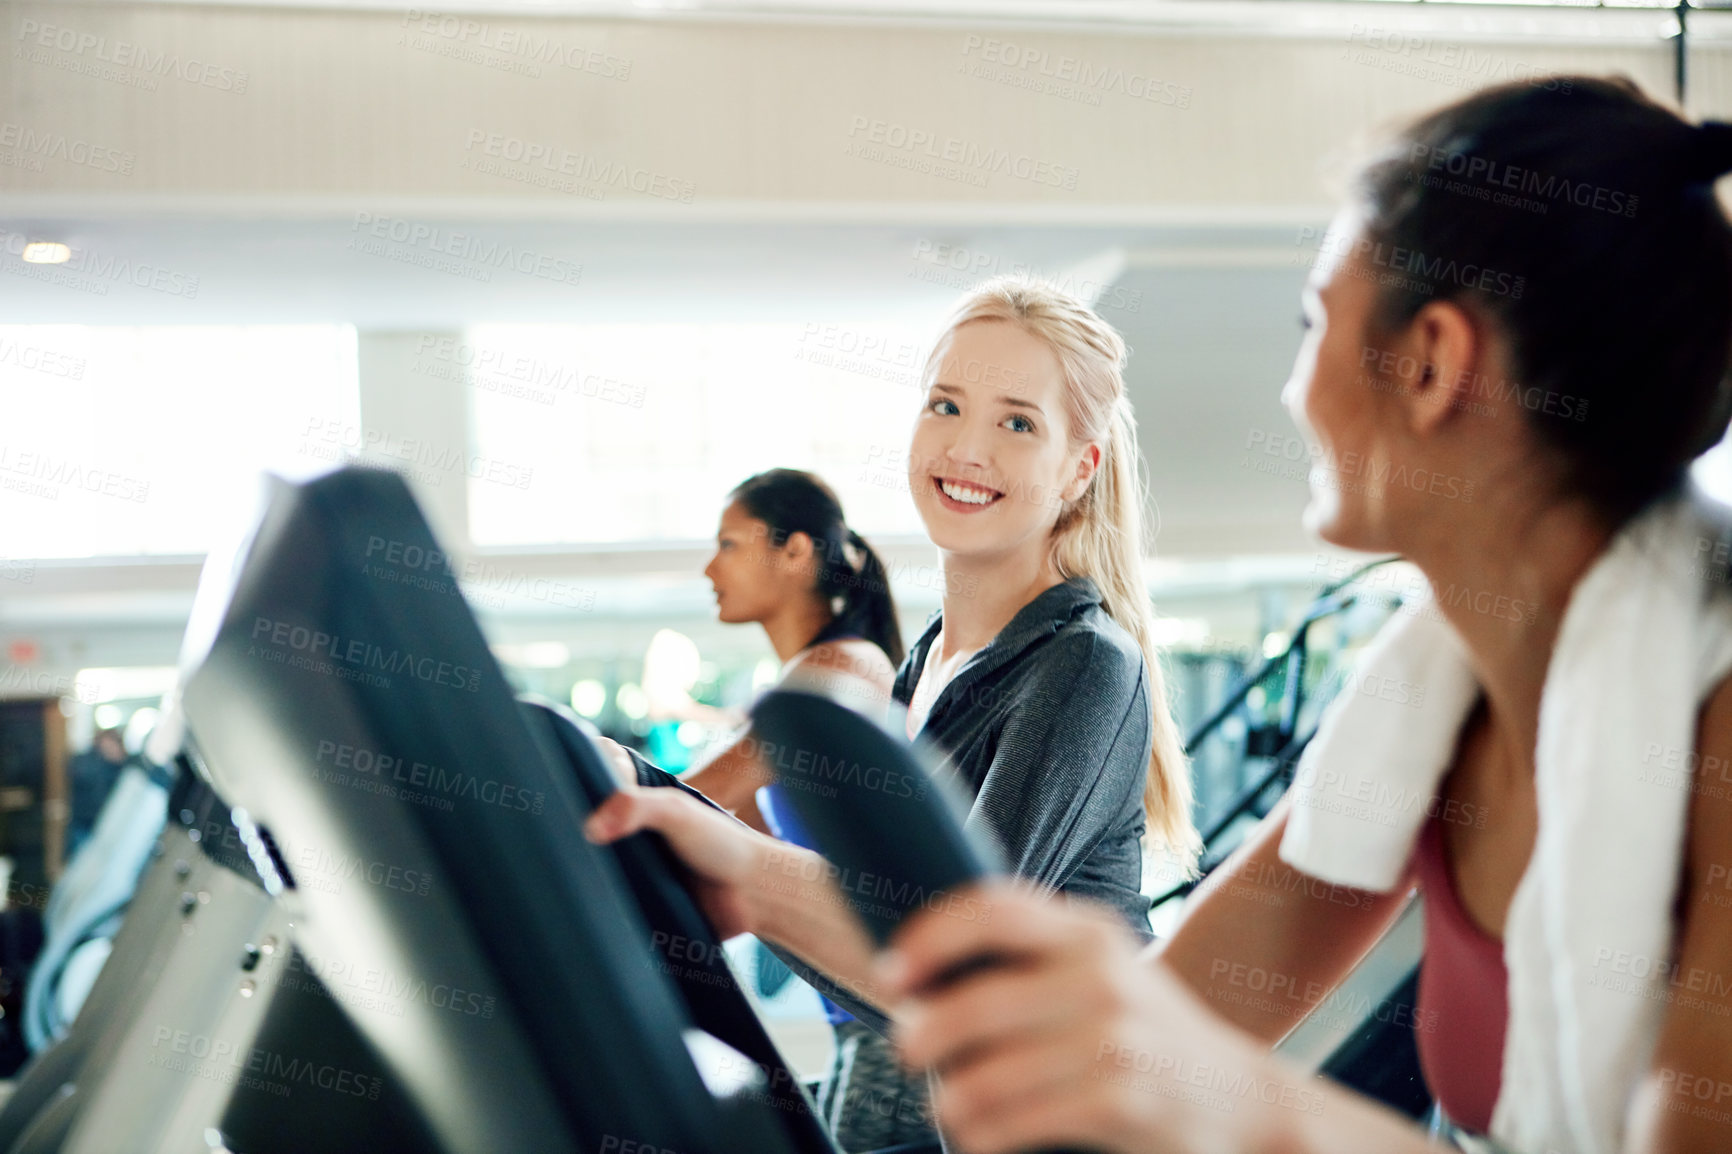 Buy stock photo Cropped shot of attractive young women working out on treadmills at the gym